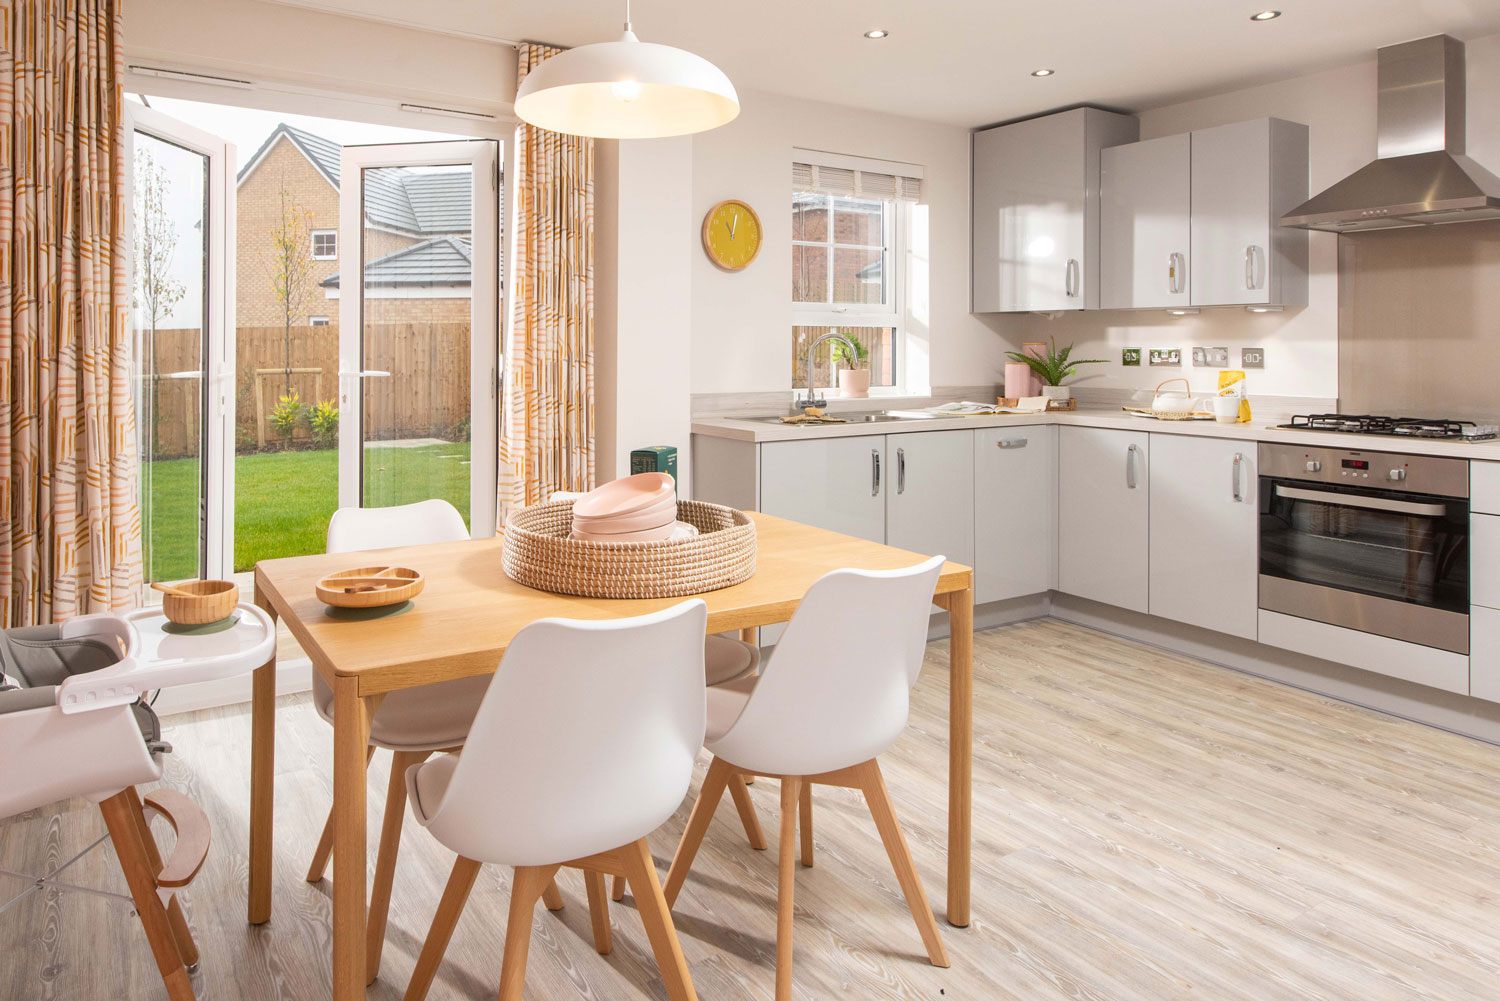 Property 3 of 10. Bourne Maidstone Show Home